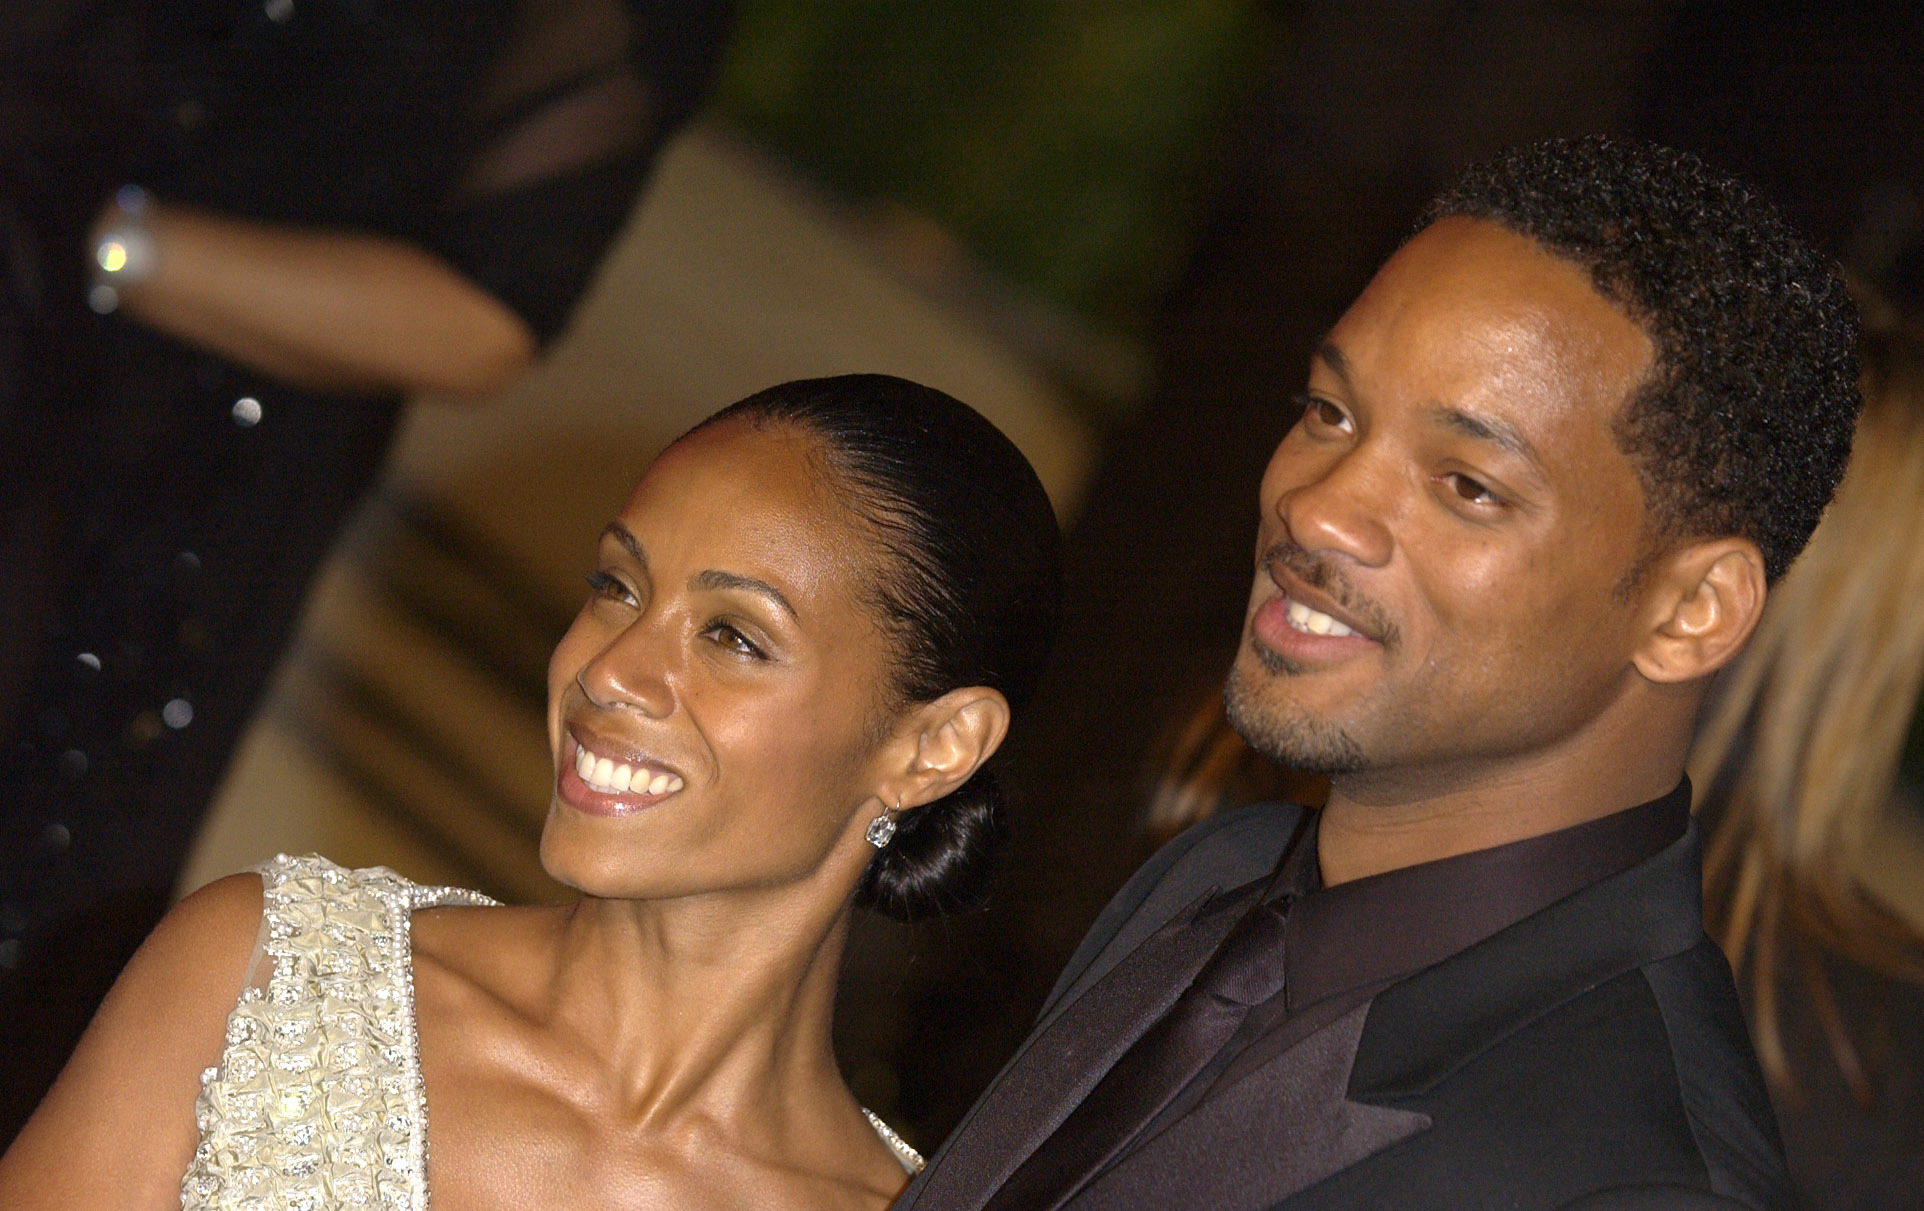 Jada Pinkett Smith and husband Will Smith on the red carpet